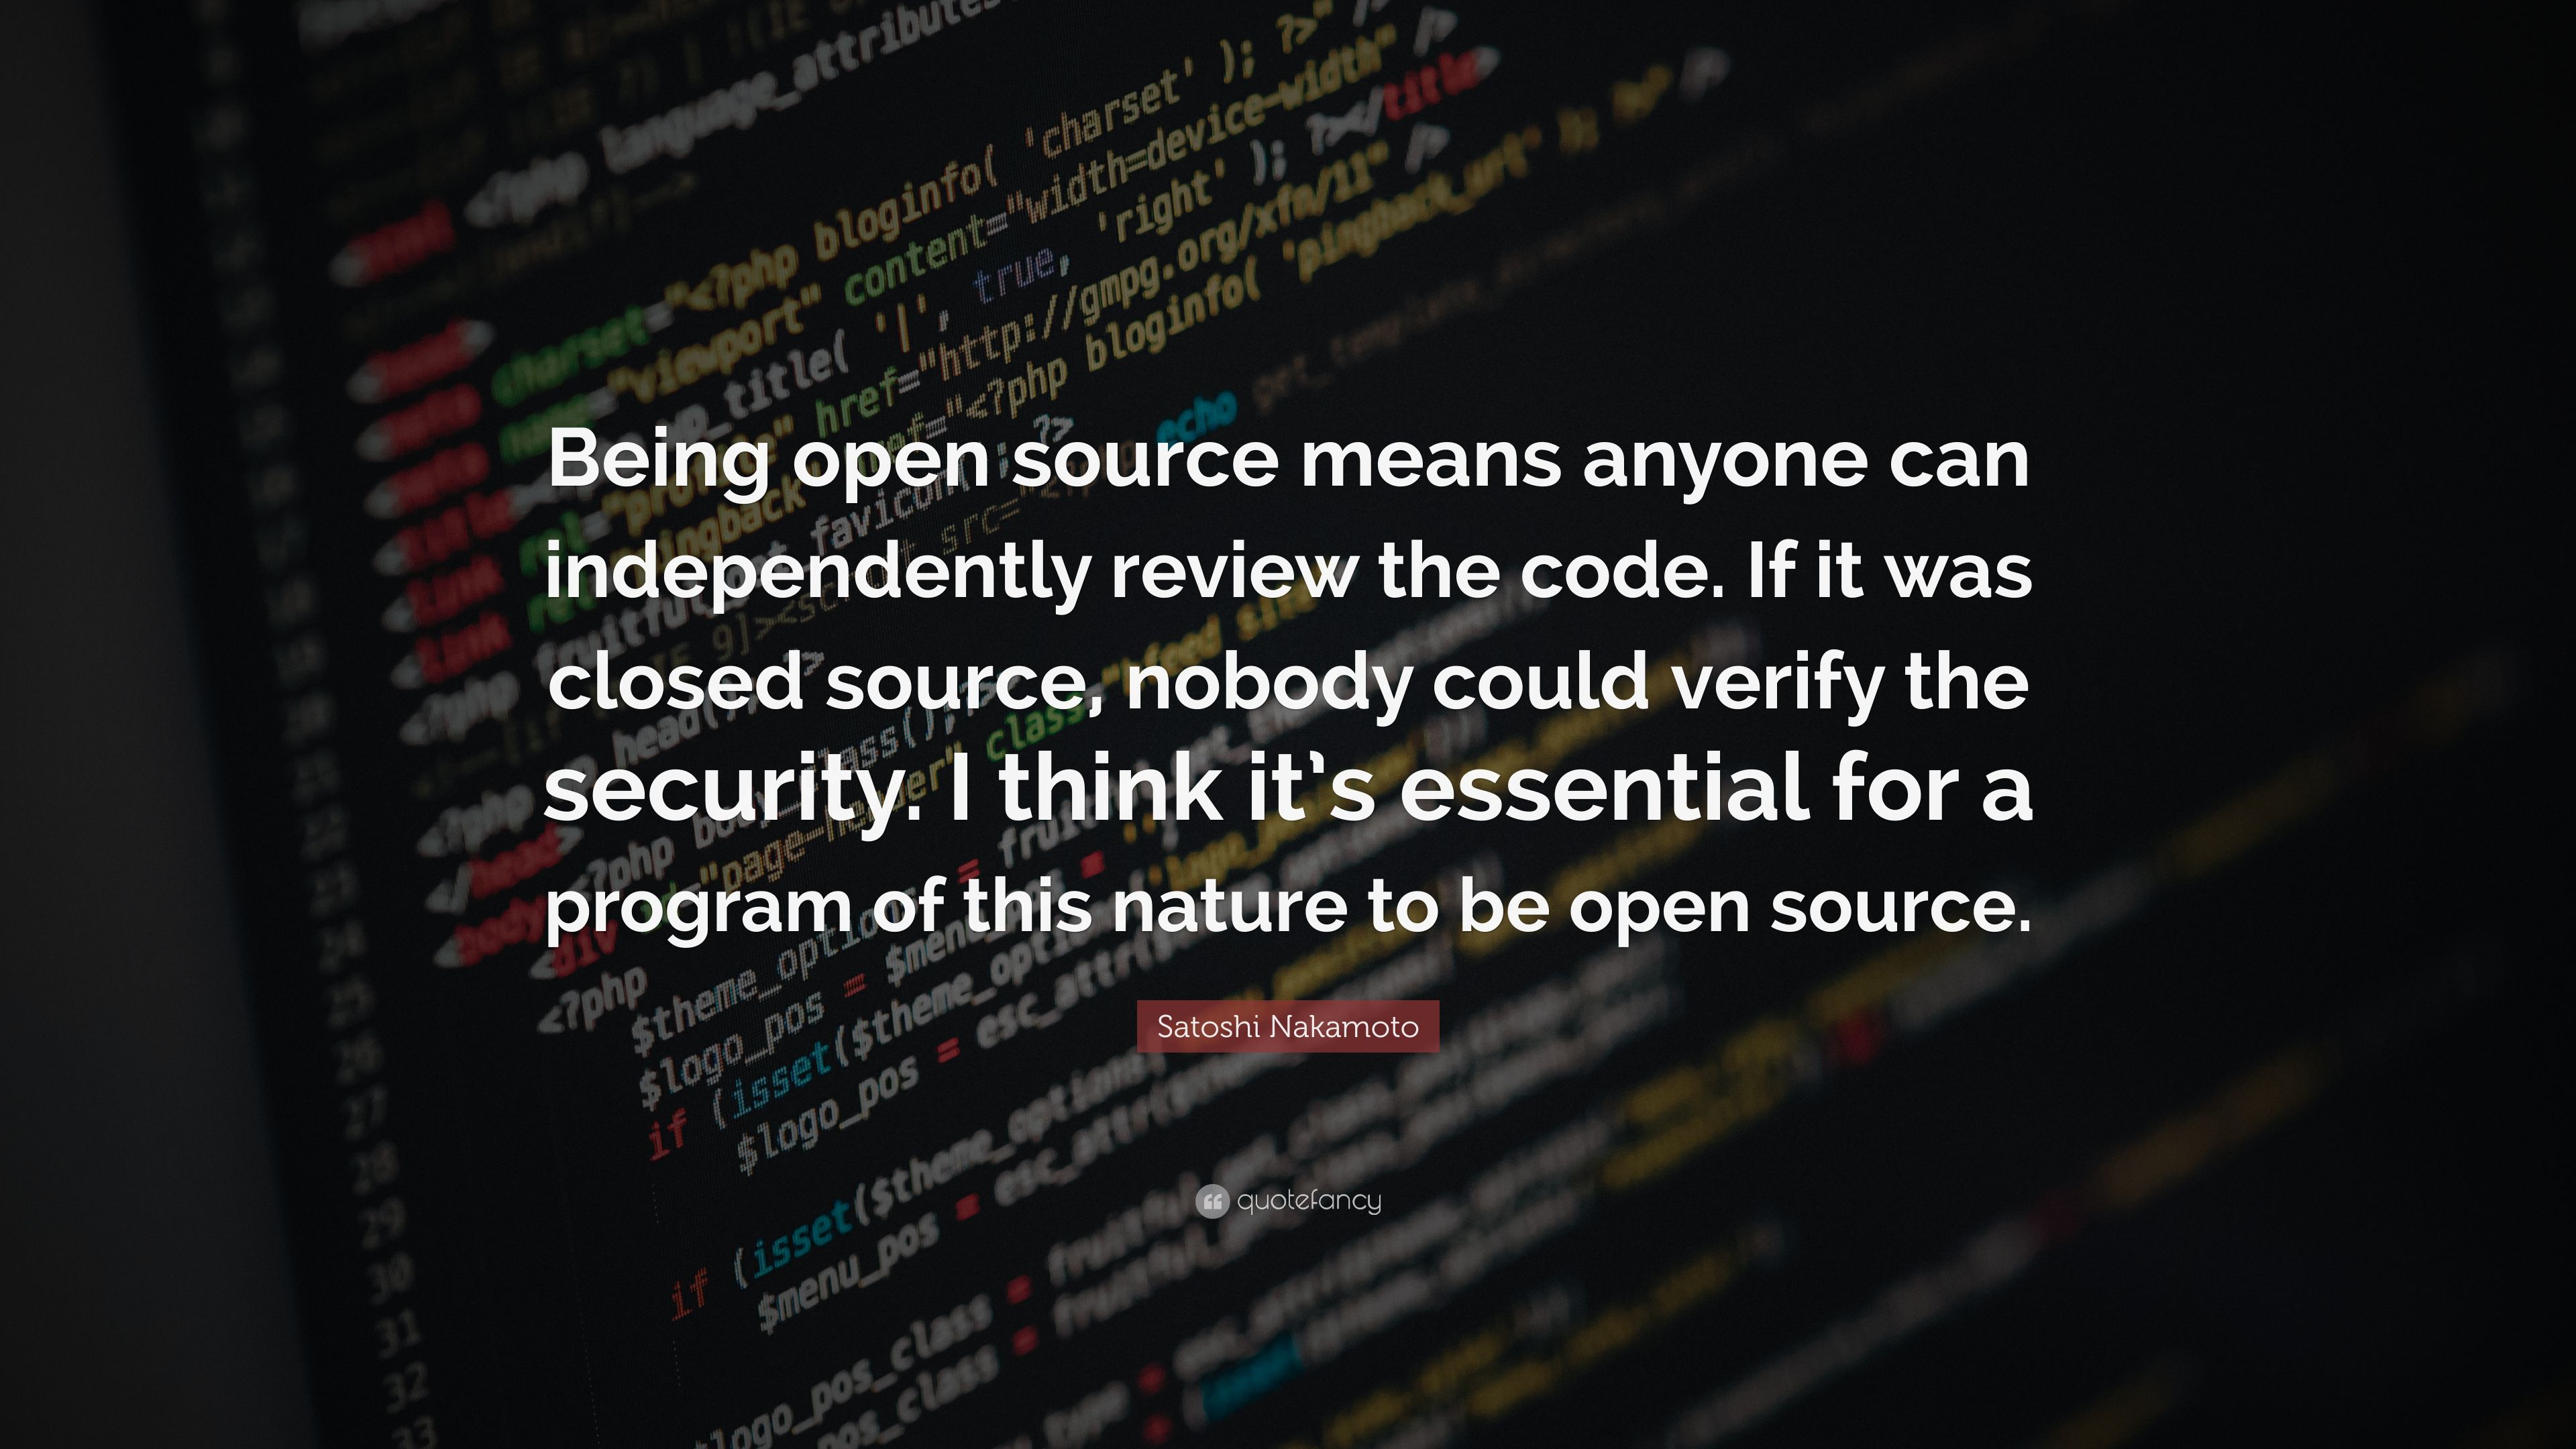 Satoshi Nakamoto Quote: “Being open source means anyone can independently review the code. If it was closed source, nobody could verify the secur.” (16 wallpaper)